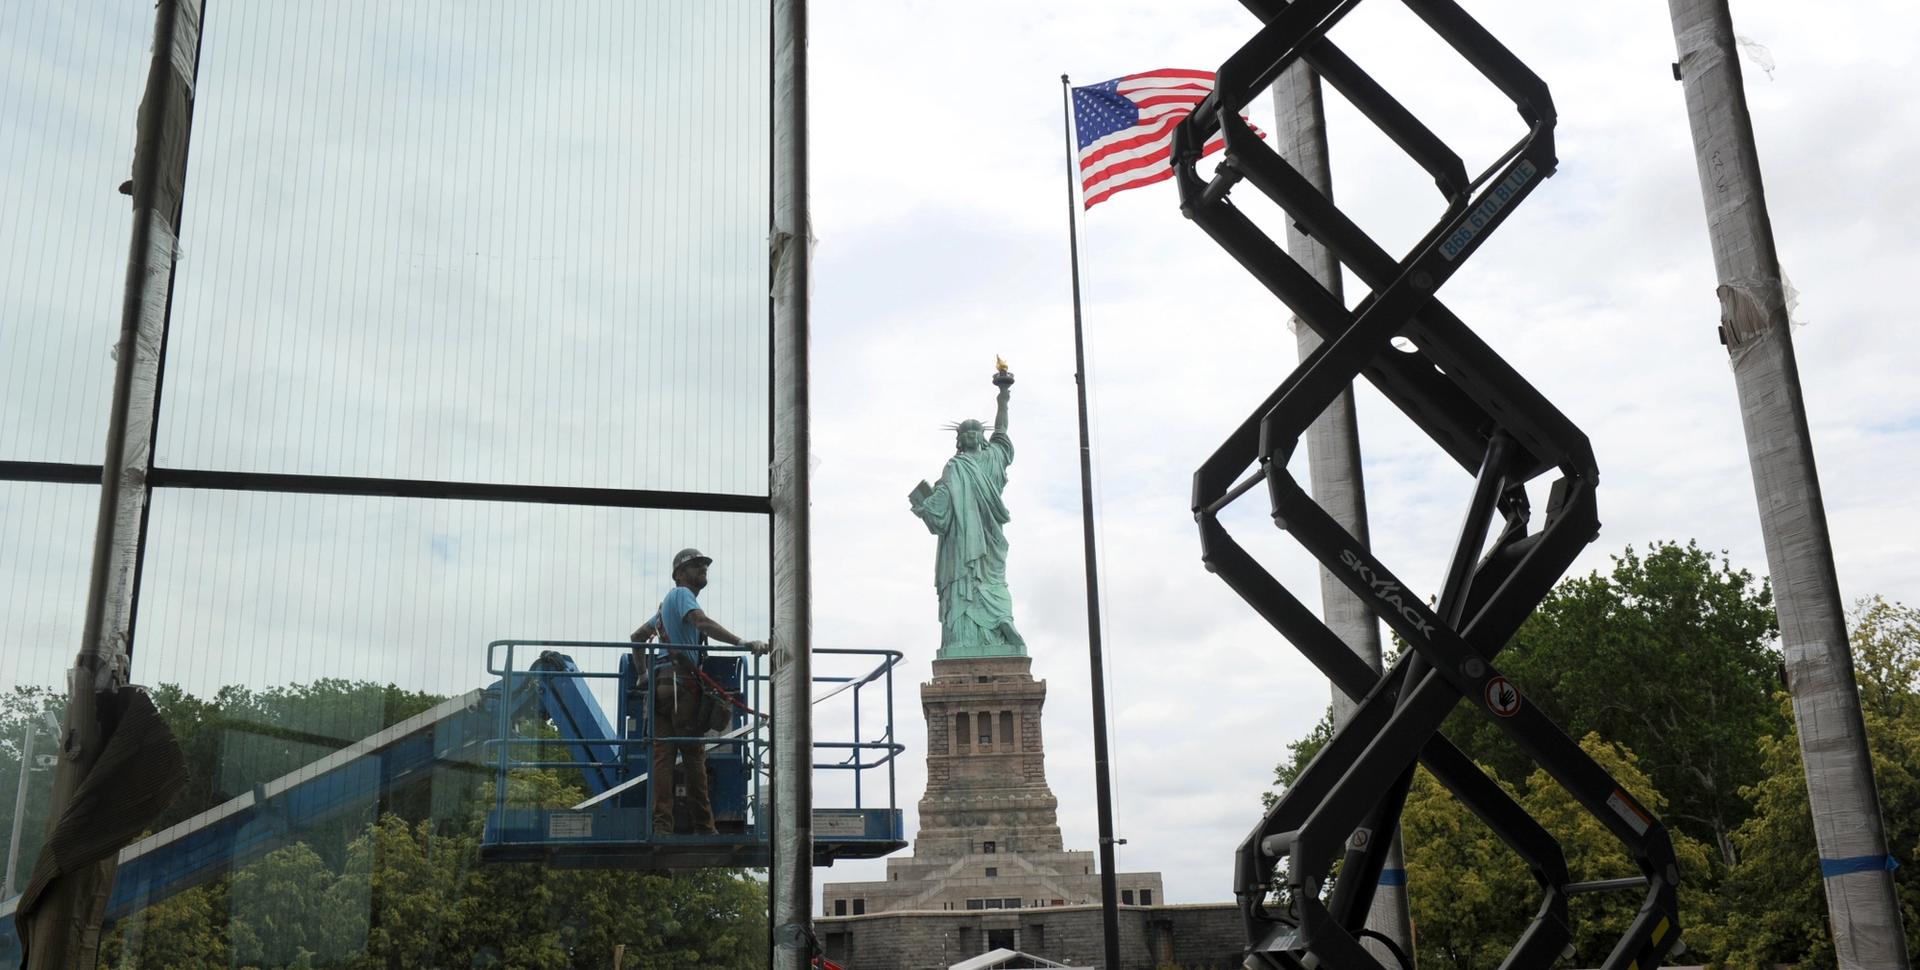 In this photo taken on Friday, June 22, 2018, the Statue of Liberty is seen from inside the Inspiration Gallery, which will house the original torch, at the Statue of Liberty Museum, expected to open in May 2019, on Liberty Island in New York.  The Statue of Liberty-Ellis Island Foundation is launching #ForLadyLiberty, a crowdfunding campaign inspired by Joseph Pulitzer’s original fundraising campaign in the 1880s, to raise funds for the new museum.  Visit ForLadyLiberty.org to contribute. (Diane Bondareff/AP Images for Statue of Liberty-Ellis Island Foundation) 